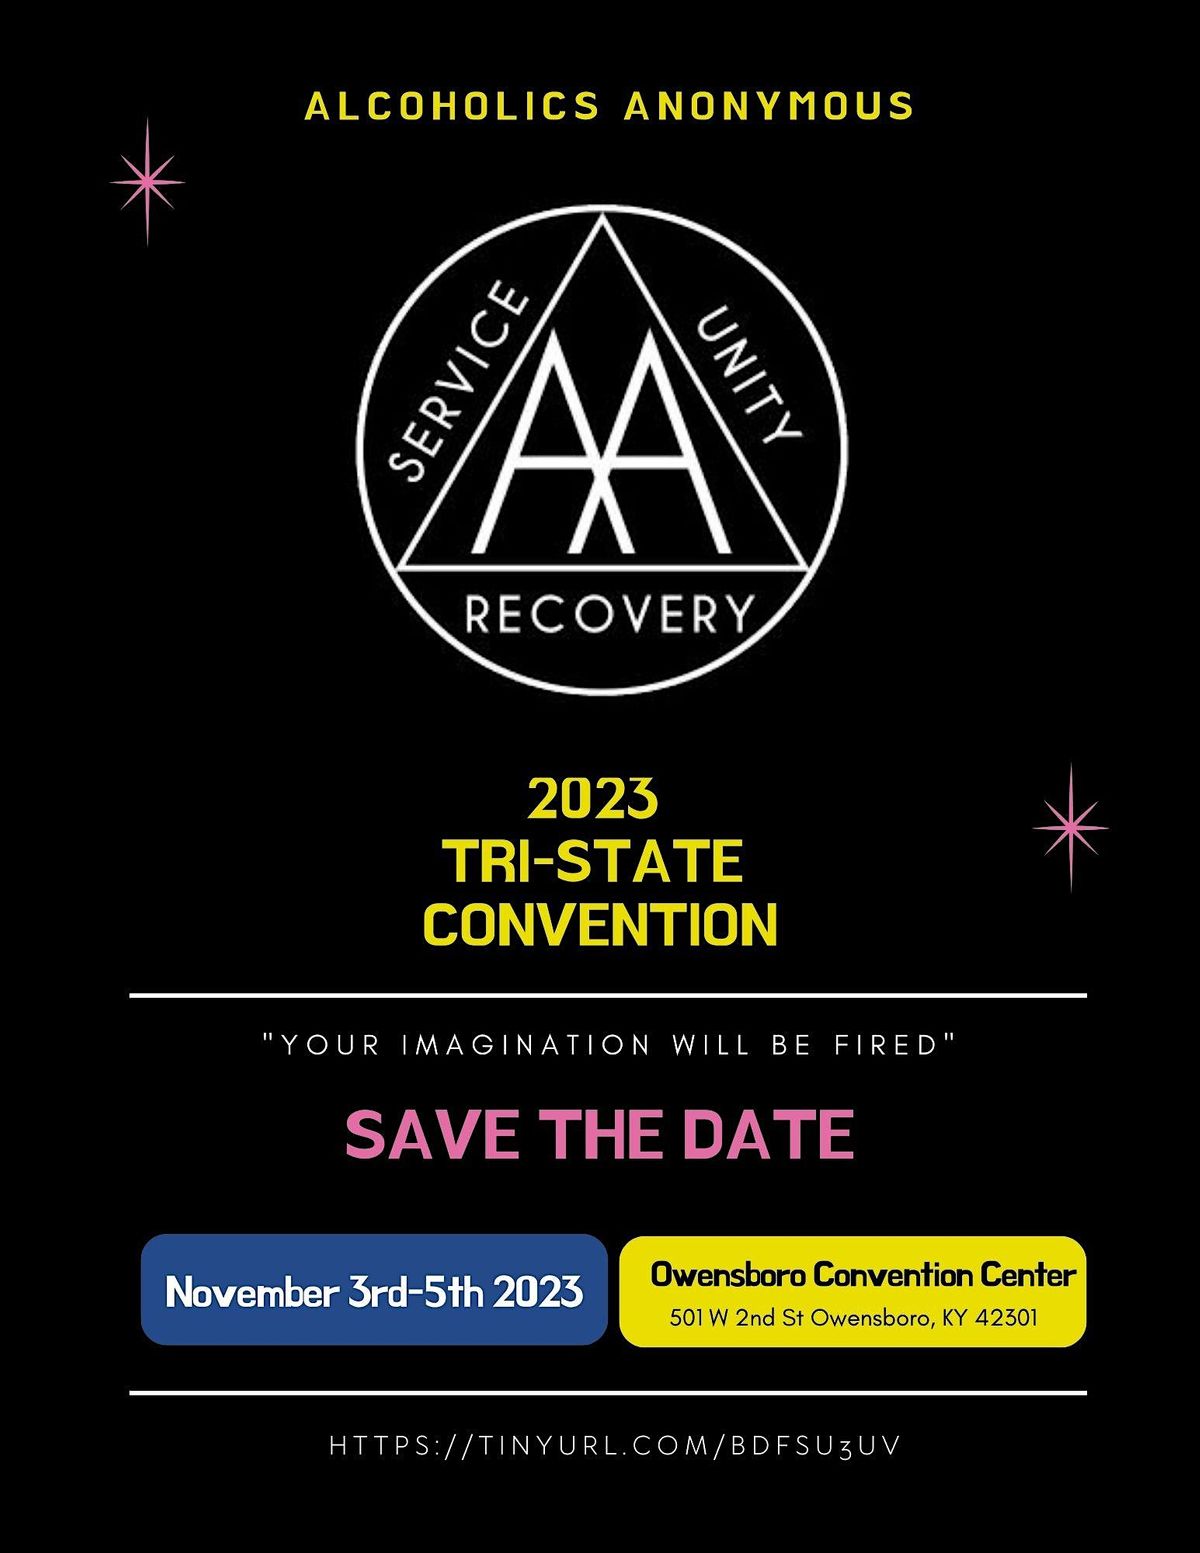 2023 Alcoholics Anonymous TriState Convention, Owensboro Convention